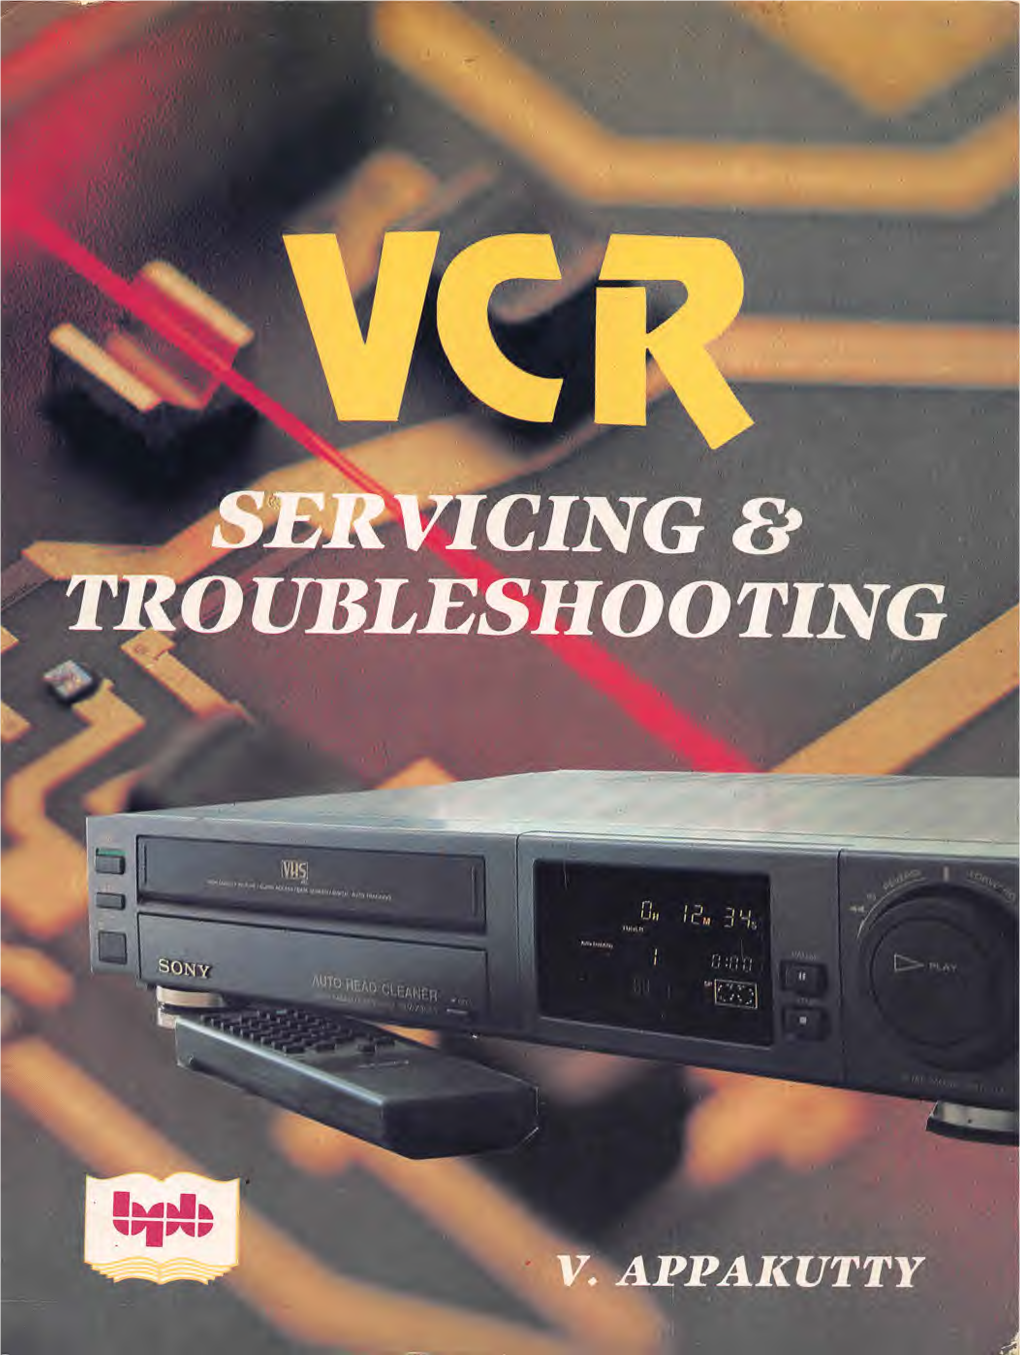 Vcr Servicing & Troubleshooting